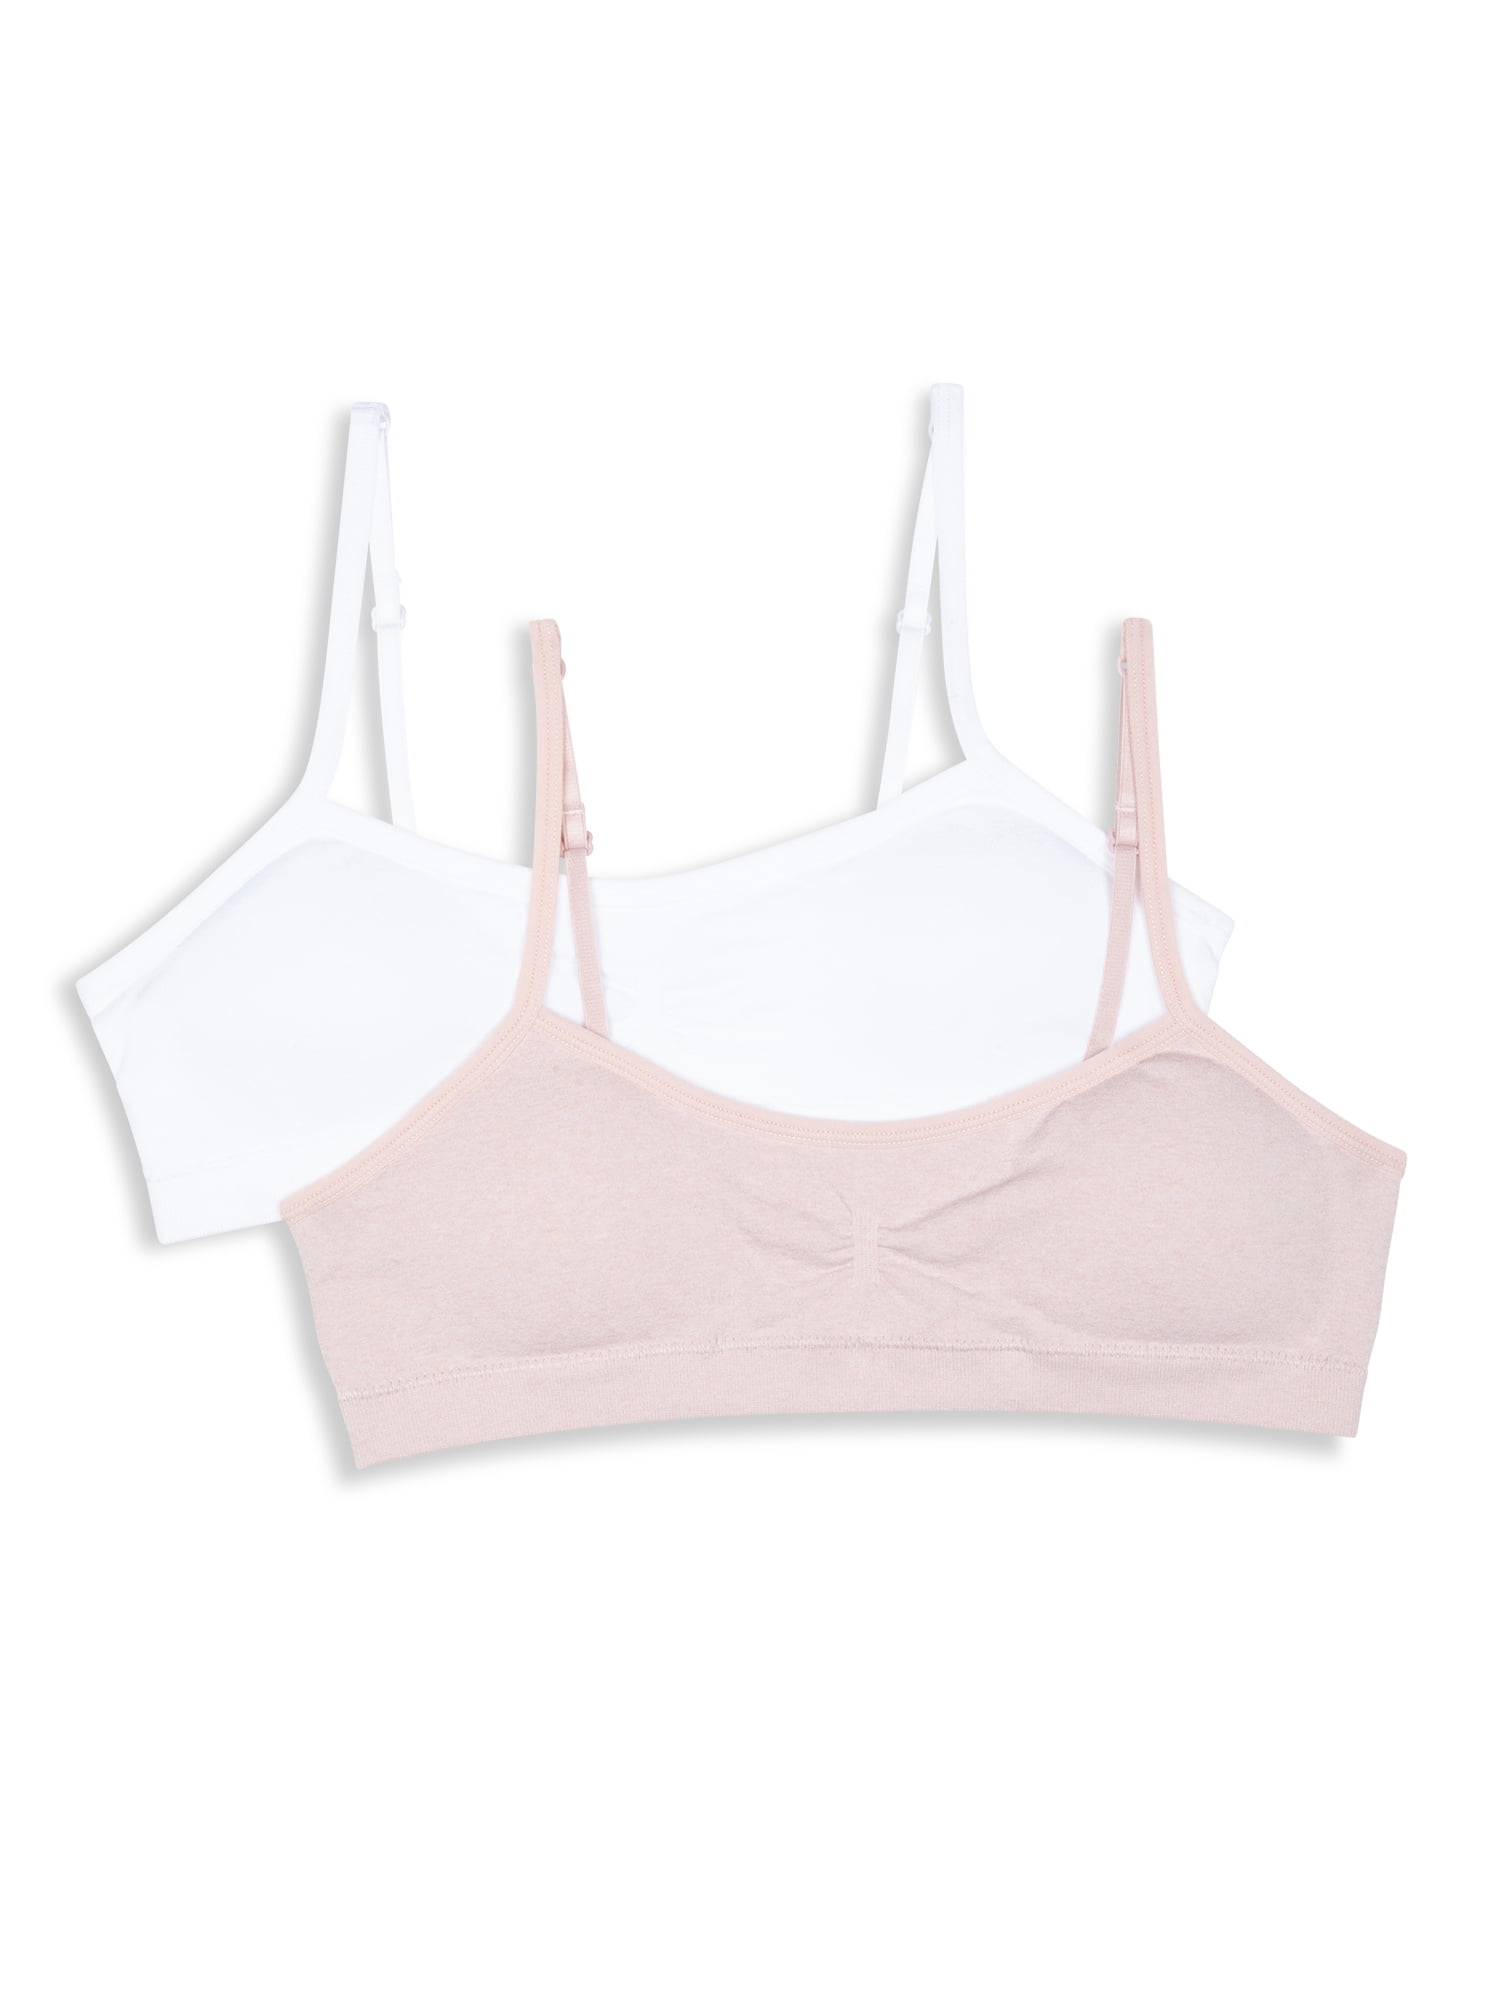 Pack of 4 Air Bra For Women Free-Size Air Bras For Girls No Straps